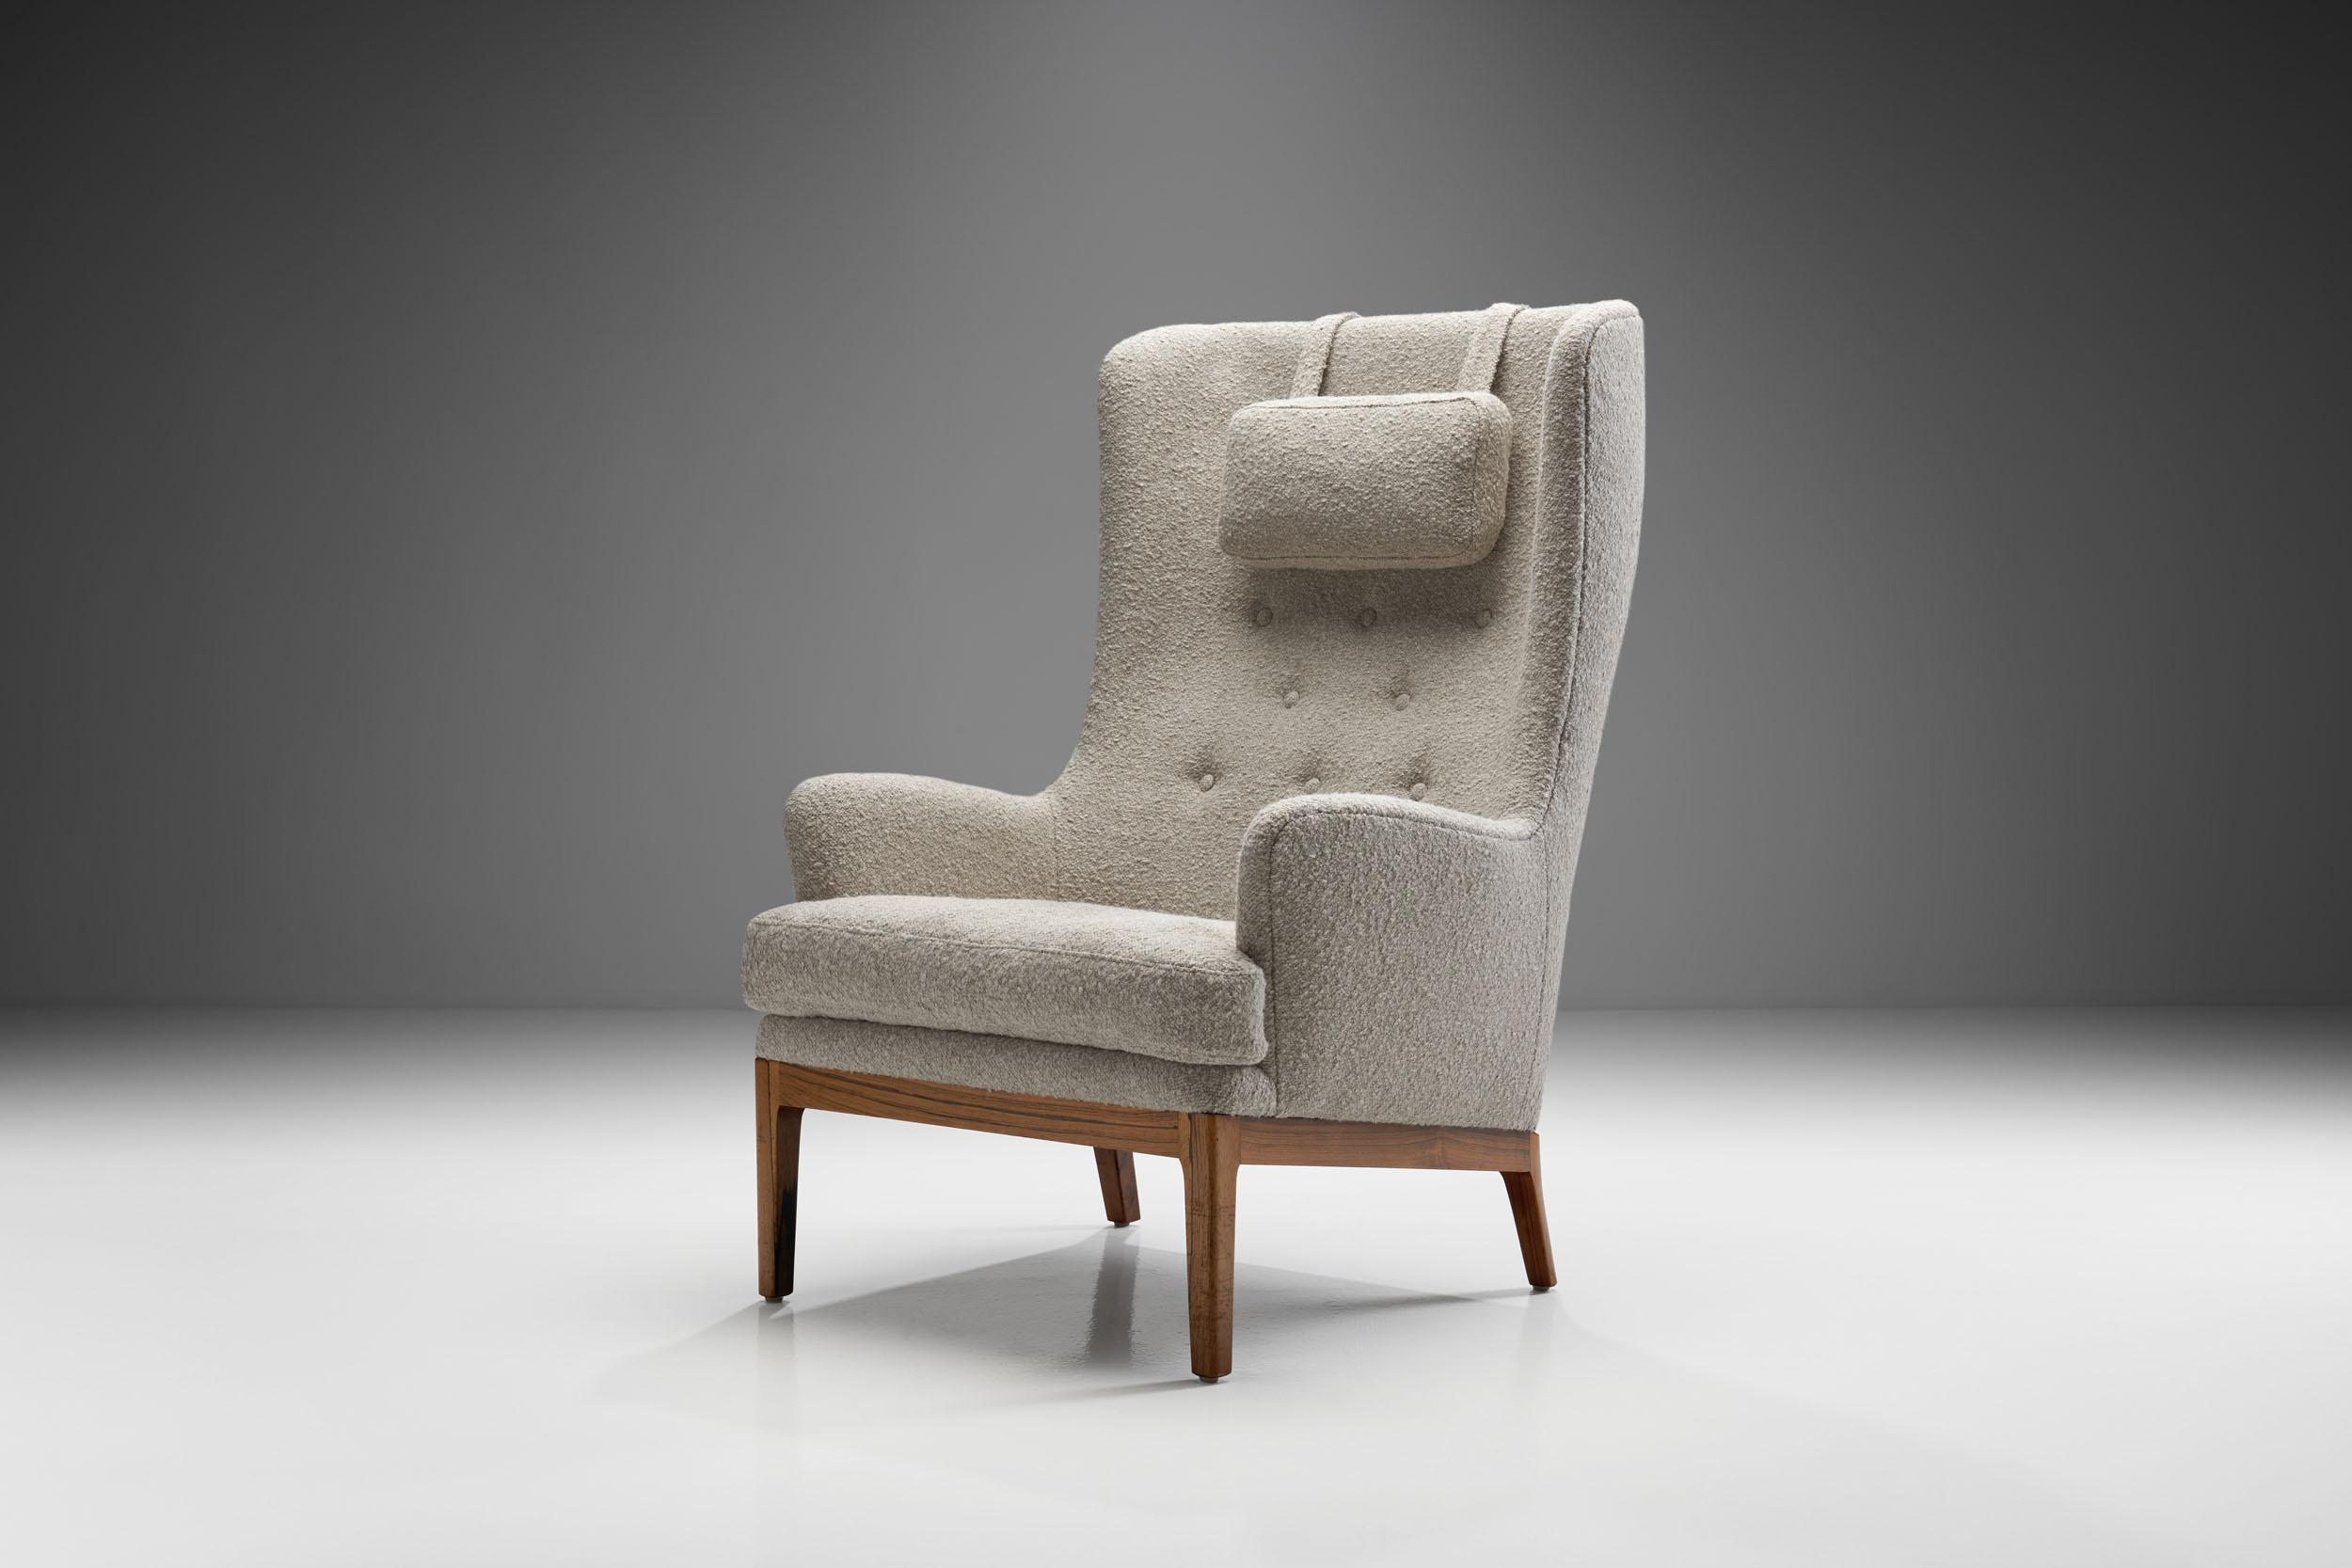 This “Krister” is among Swedish design icon, Arne Norell’s coziest works. This high-back armchair’s comfort is equaled by its stylishness and elegance.

The chair is raised on a teak wooden frame covered by beautiful, light colored bouclé